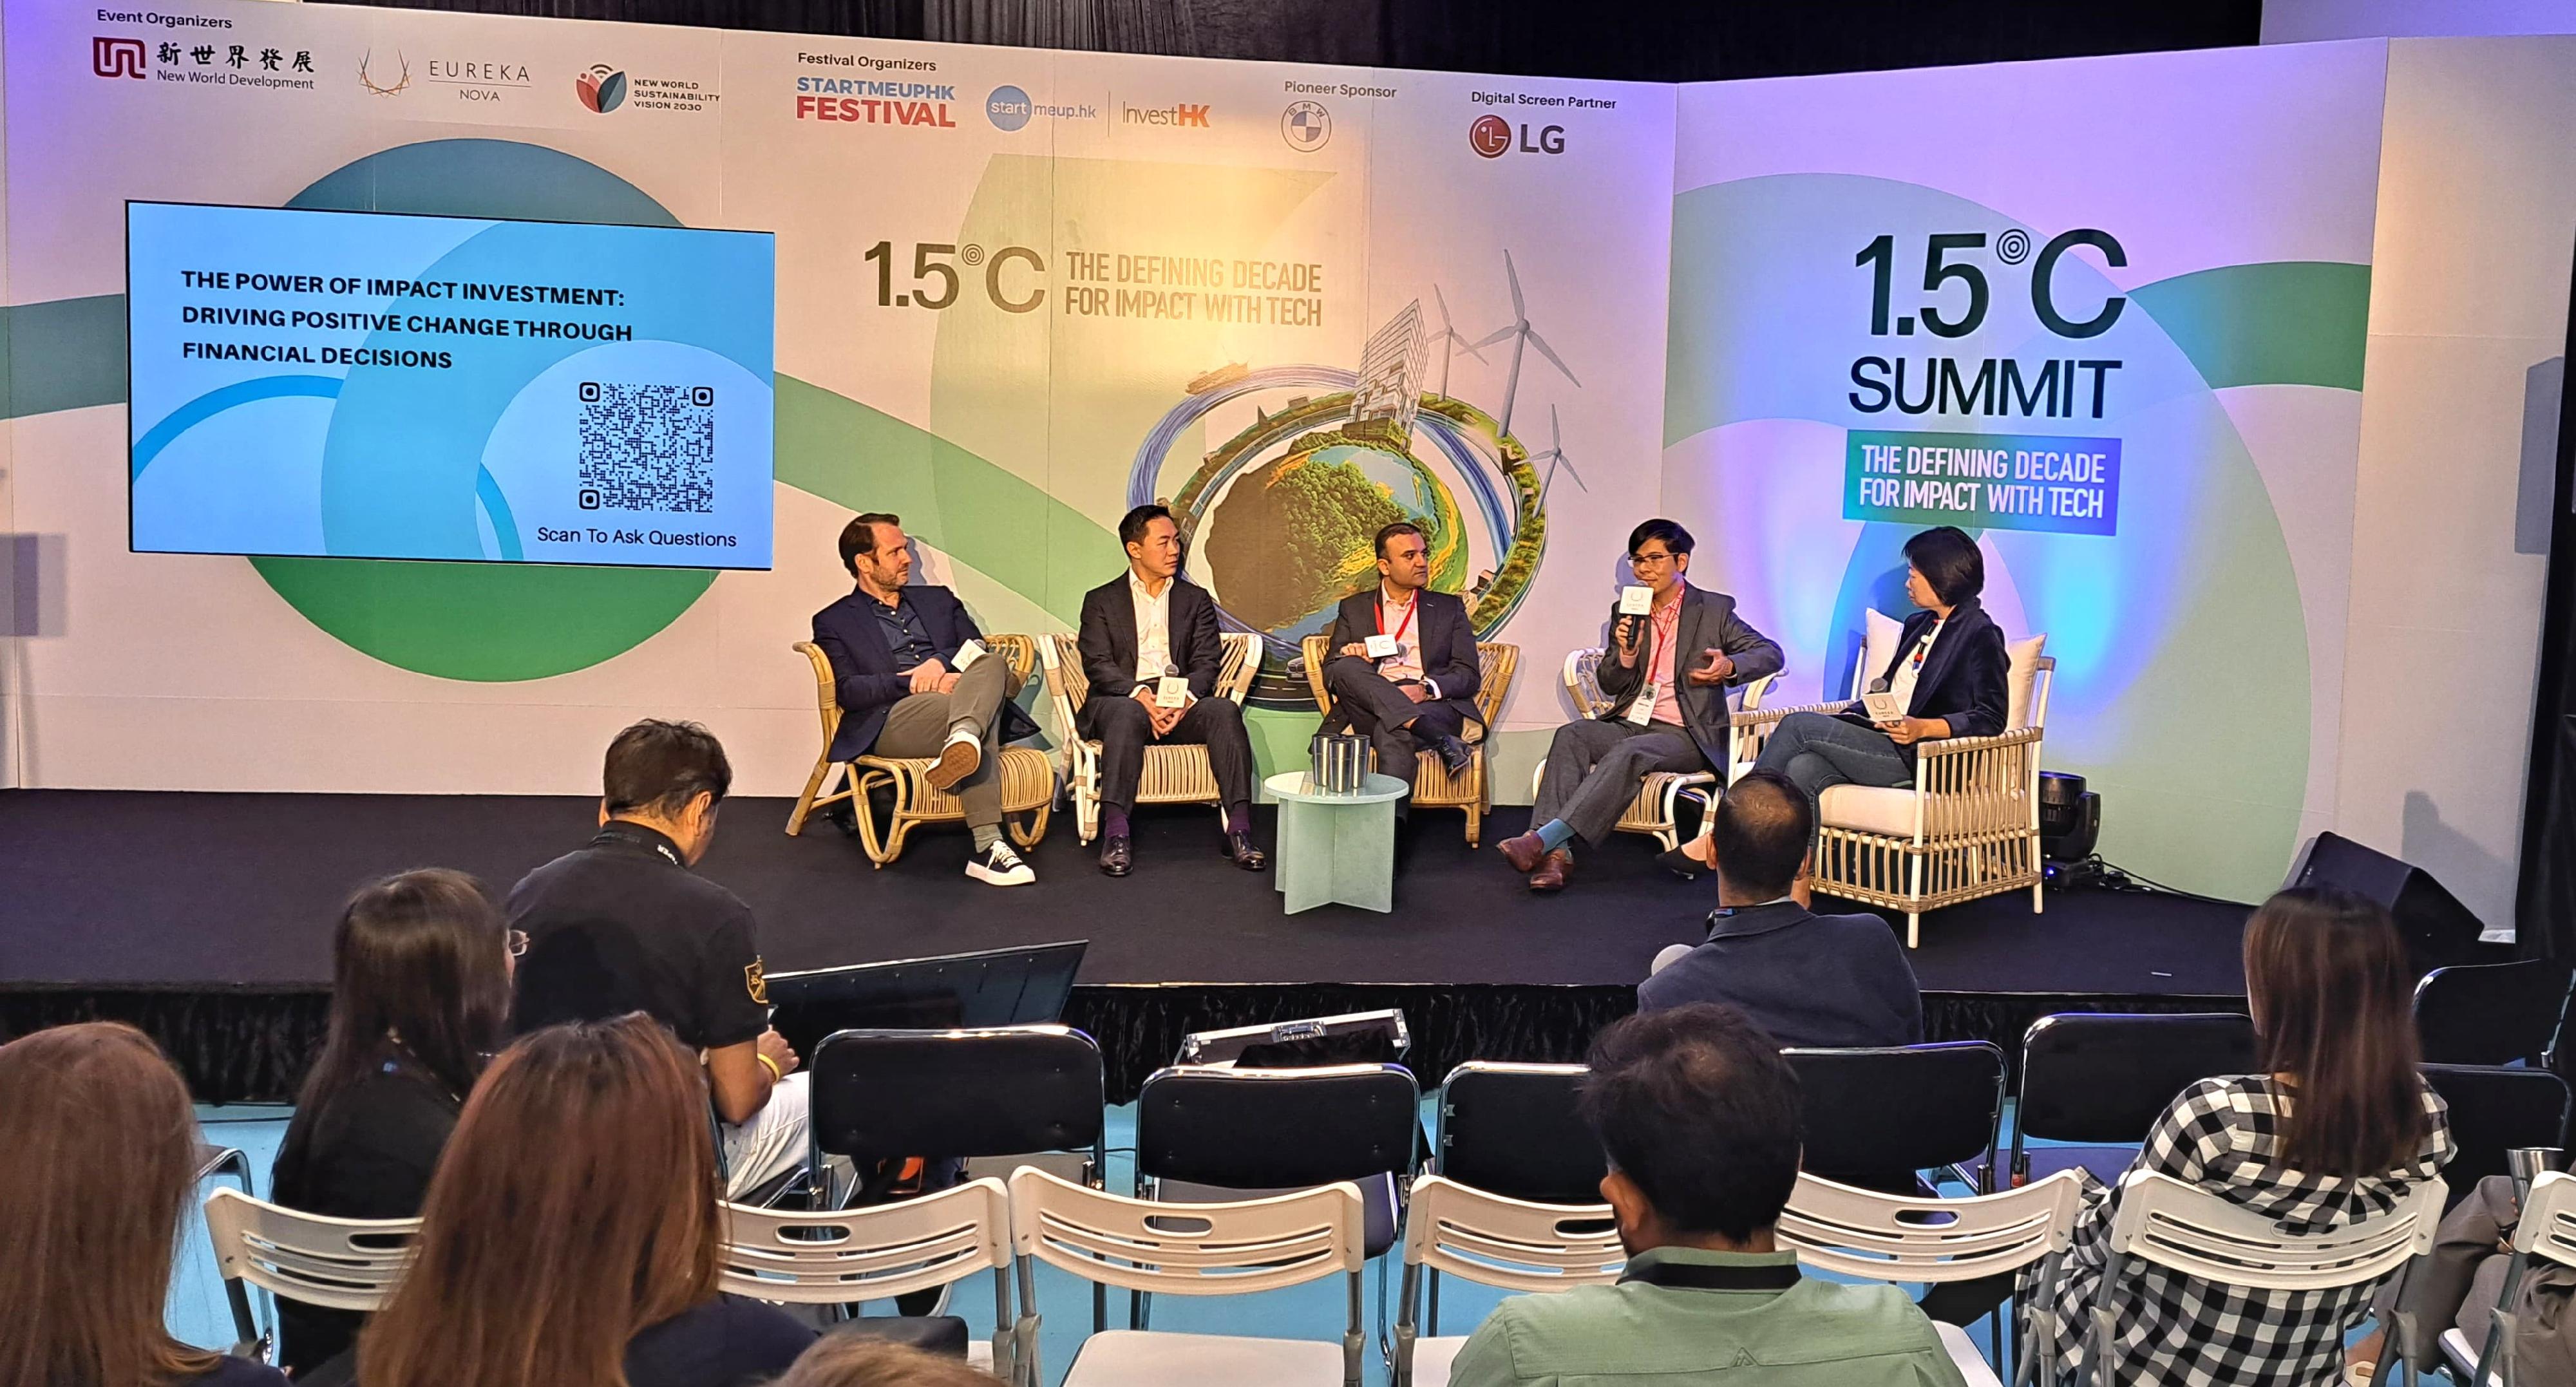 Photo shows (from left) Co-Founder/Managing Partner, Undivided Ventures Mr Alexander Bent; the Managing Director, MTR Lab Company Limited, Mr Michael Chan; the Director, Investment Origination, Asia-Pacific Region Program, NatureVest, the Nature Conservancy, Mr Vikalp Sabhlok; and the Head of Market Intelligence, BlueOnion, Mr William Yuen, during the panel discussion at The 1.5°C Summit - The Defining Decade for Impact with Tech.